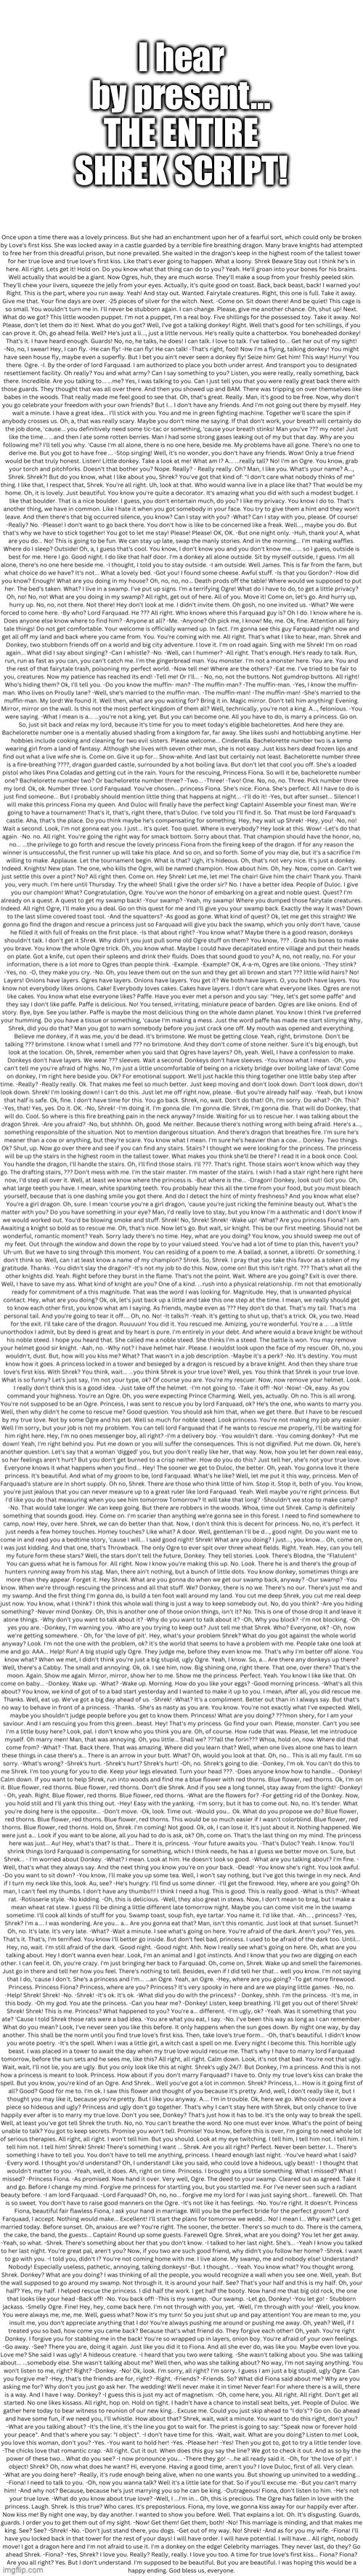 THE ENTIRE SHREK SCRIPT | I hear by present… THE ENTIRE SHREK SCRIPT! | image tagged in shrek,long meme,long memes,funny,funny memes,movies | made w/ Imgflip meme maker